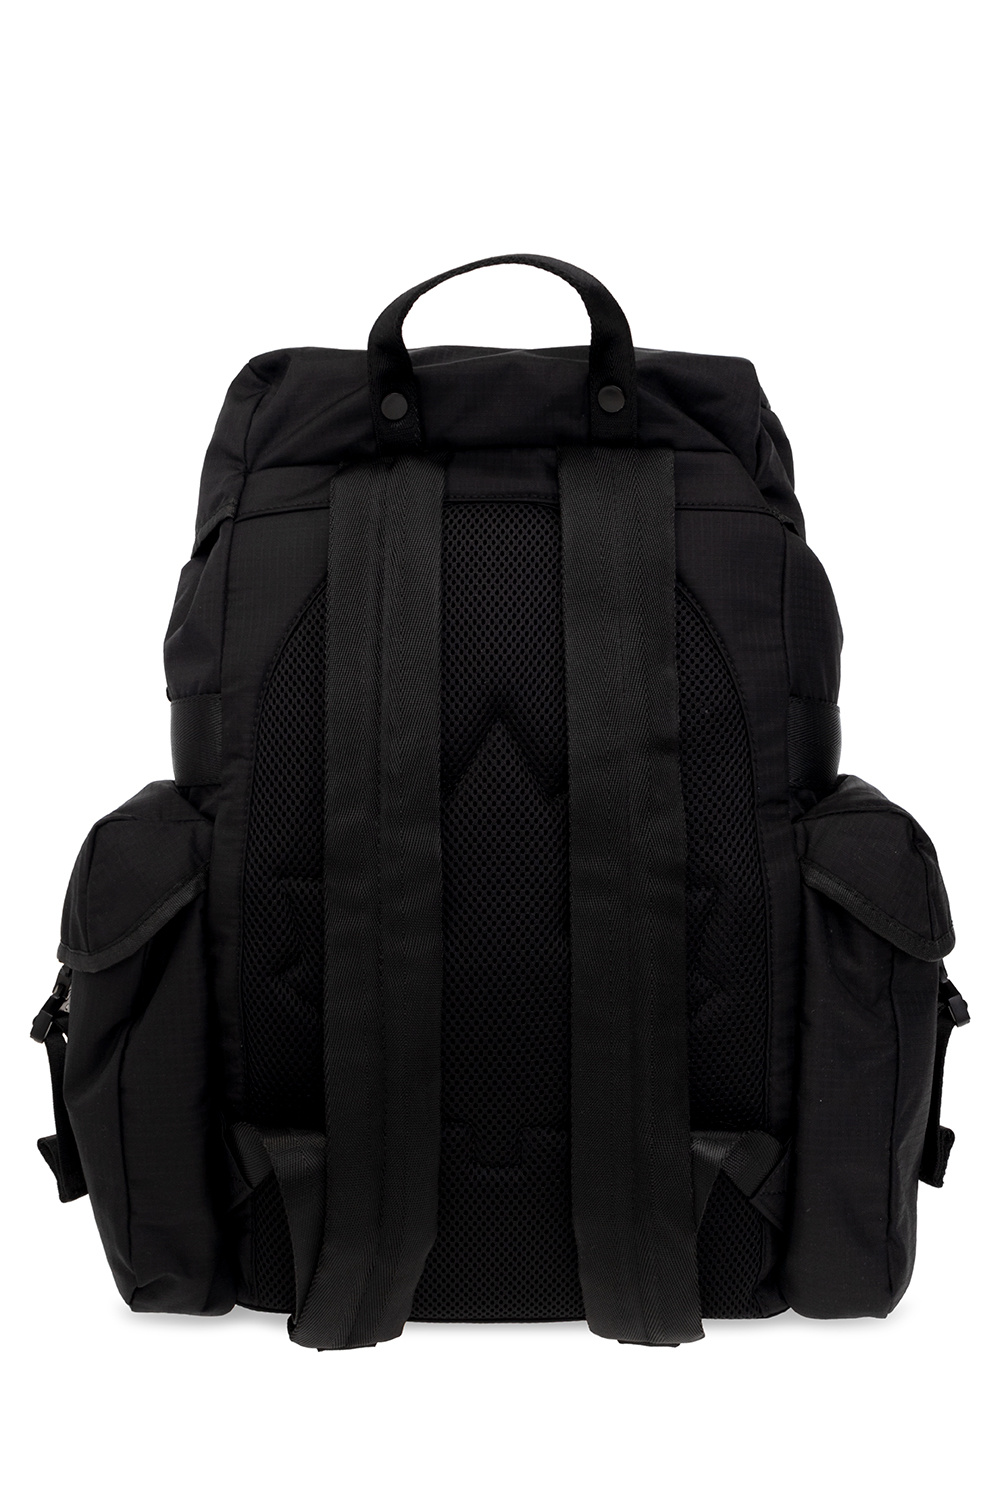 Dsquared2 'Ceresio 9’ backpack